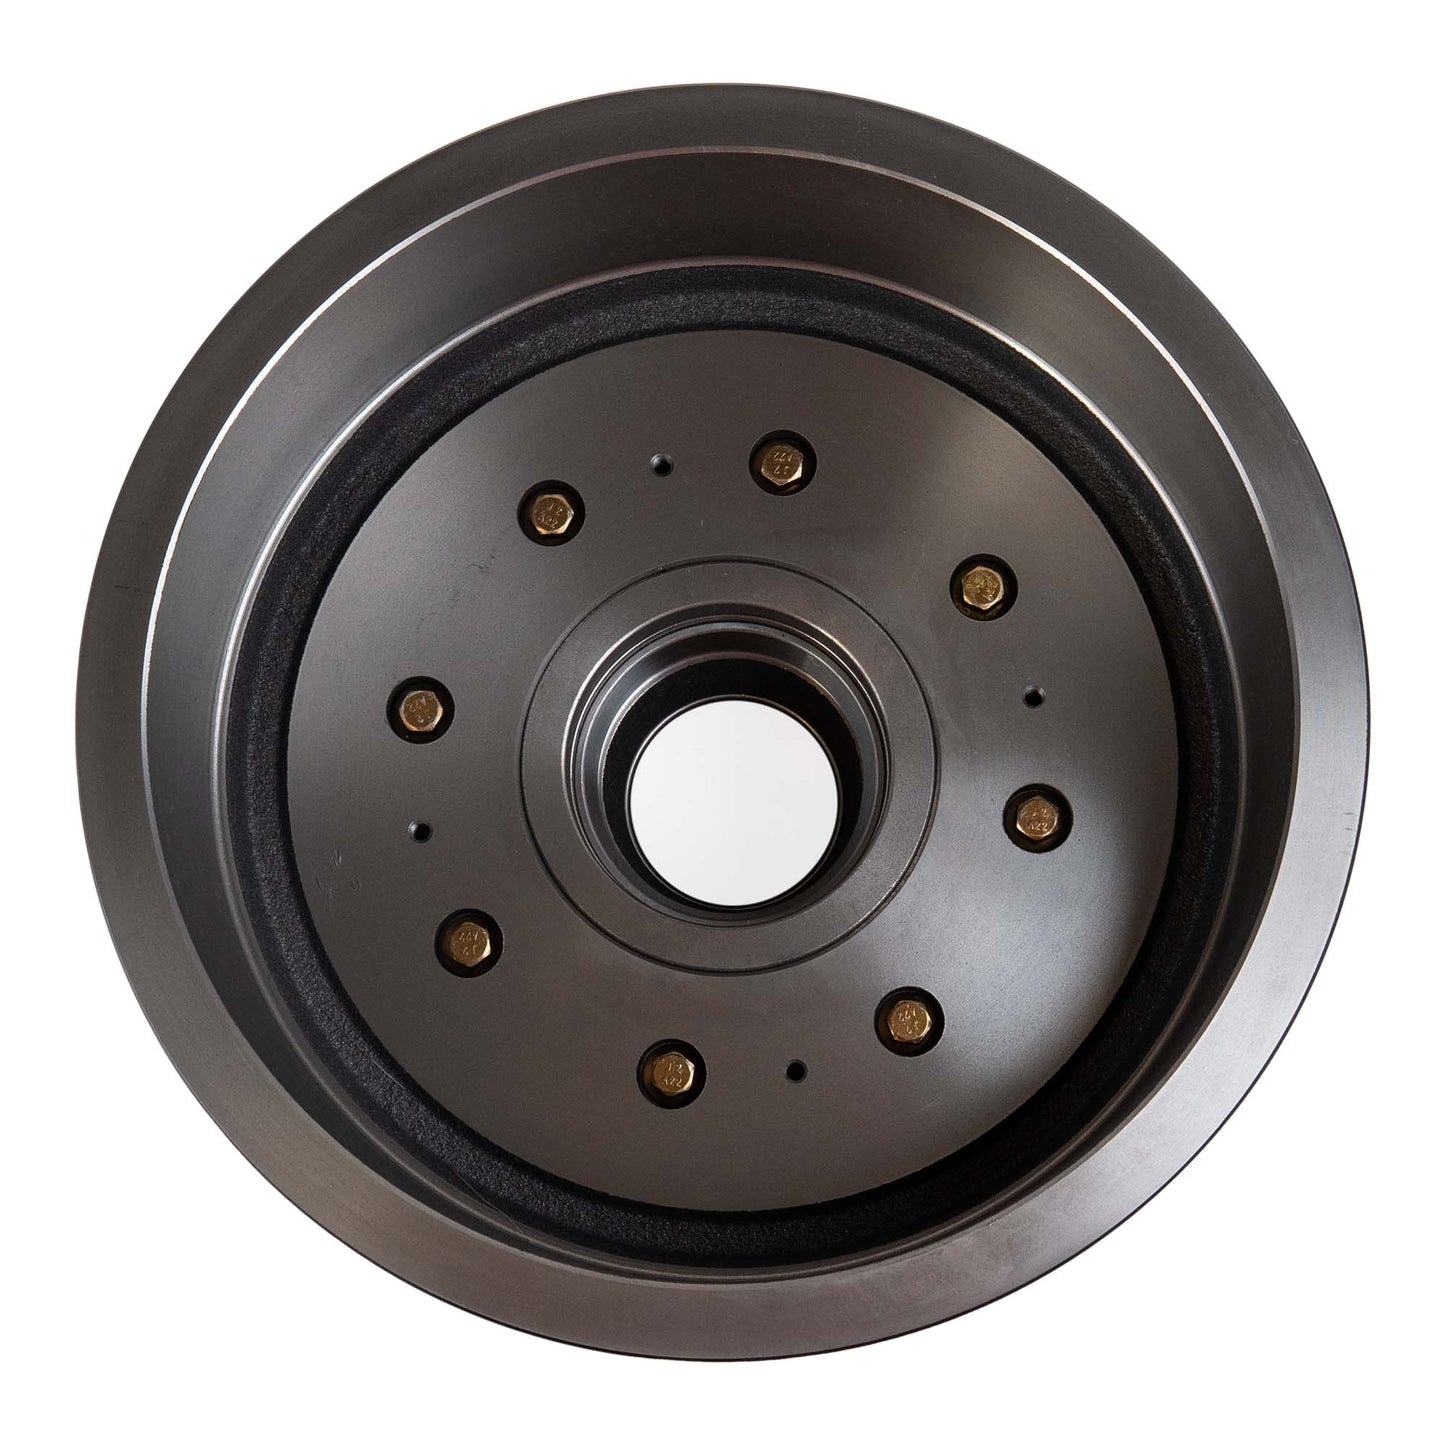 9-10KGD Trailer Axle Hub and Drum - 8 Lug (Made After May 2013) - The Trailer Parts Outlet